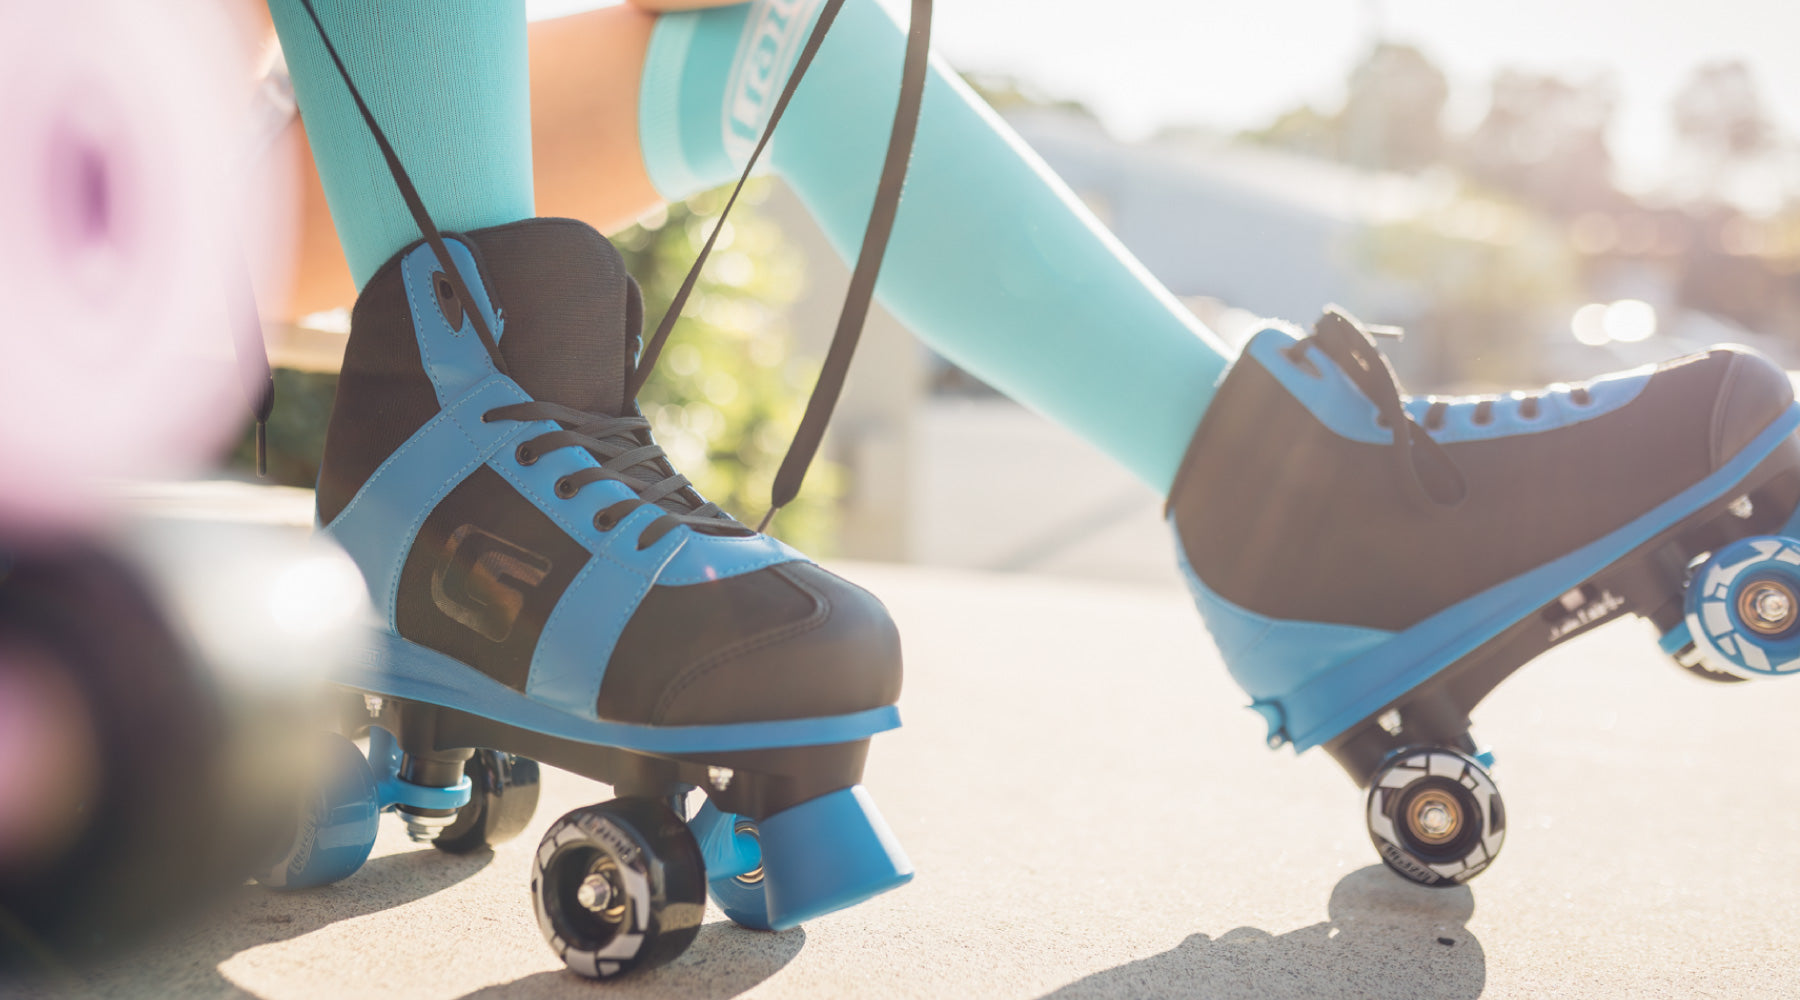 TIPS FOR GETTING STARTED WITH YOUR NEW ROLLER SKATES